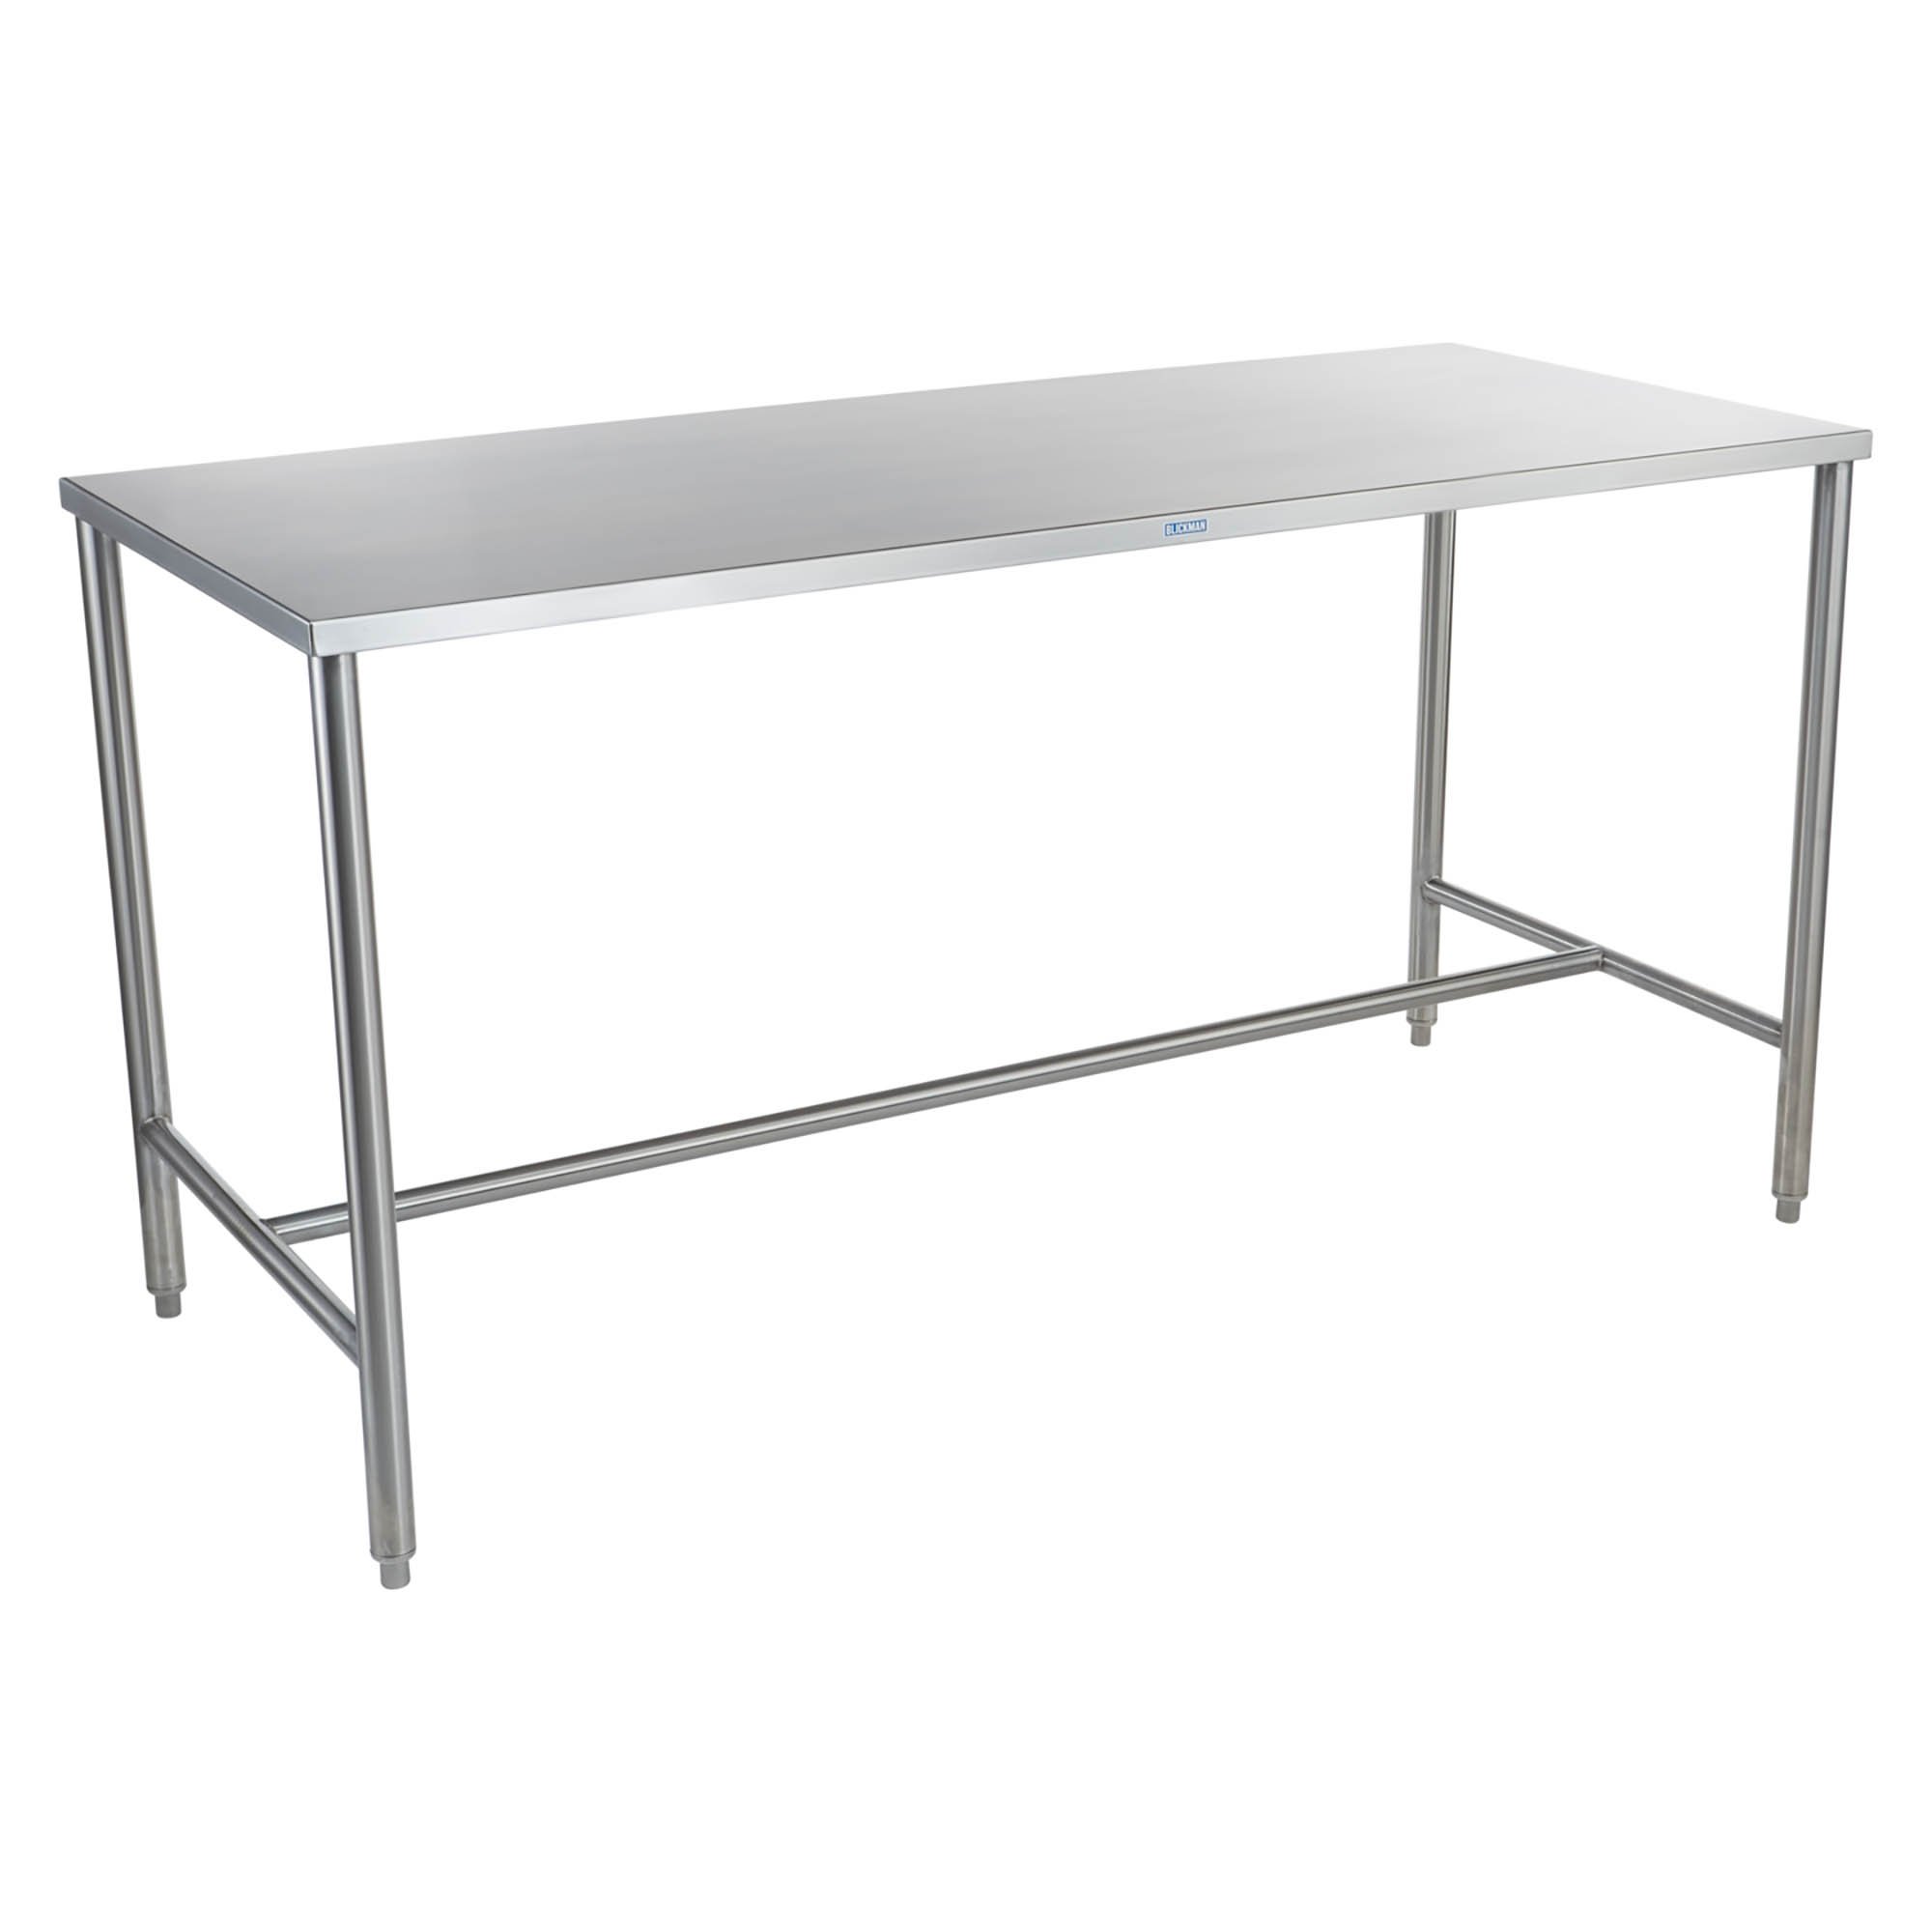 36H Stainless Steel Work Tables with H-Brace & Bullet Feet by Blickman